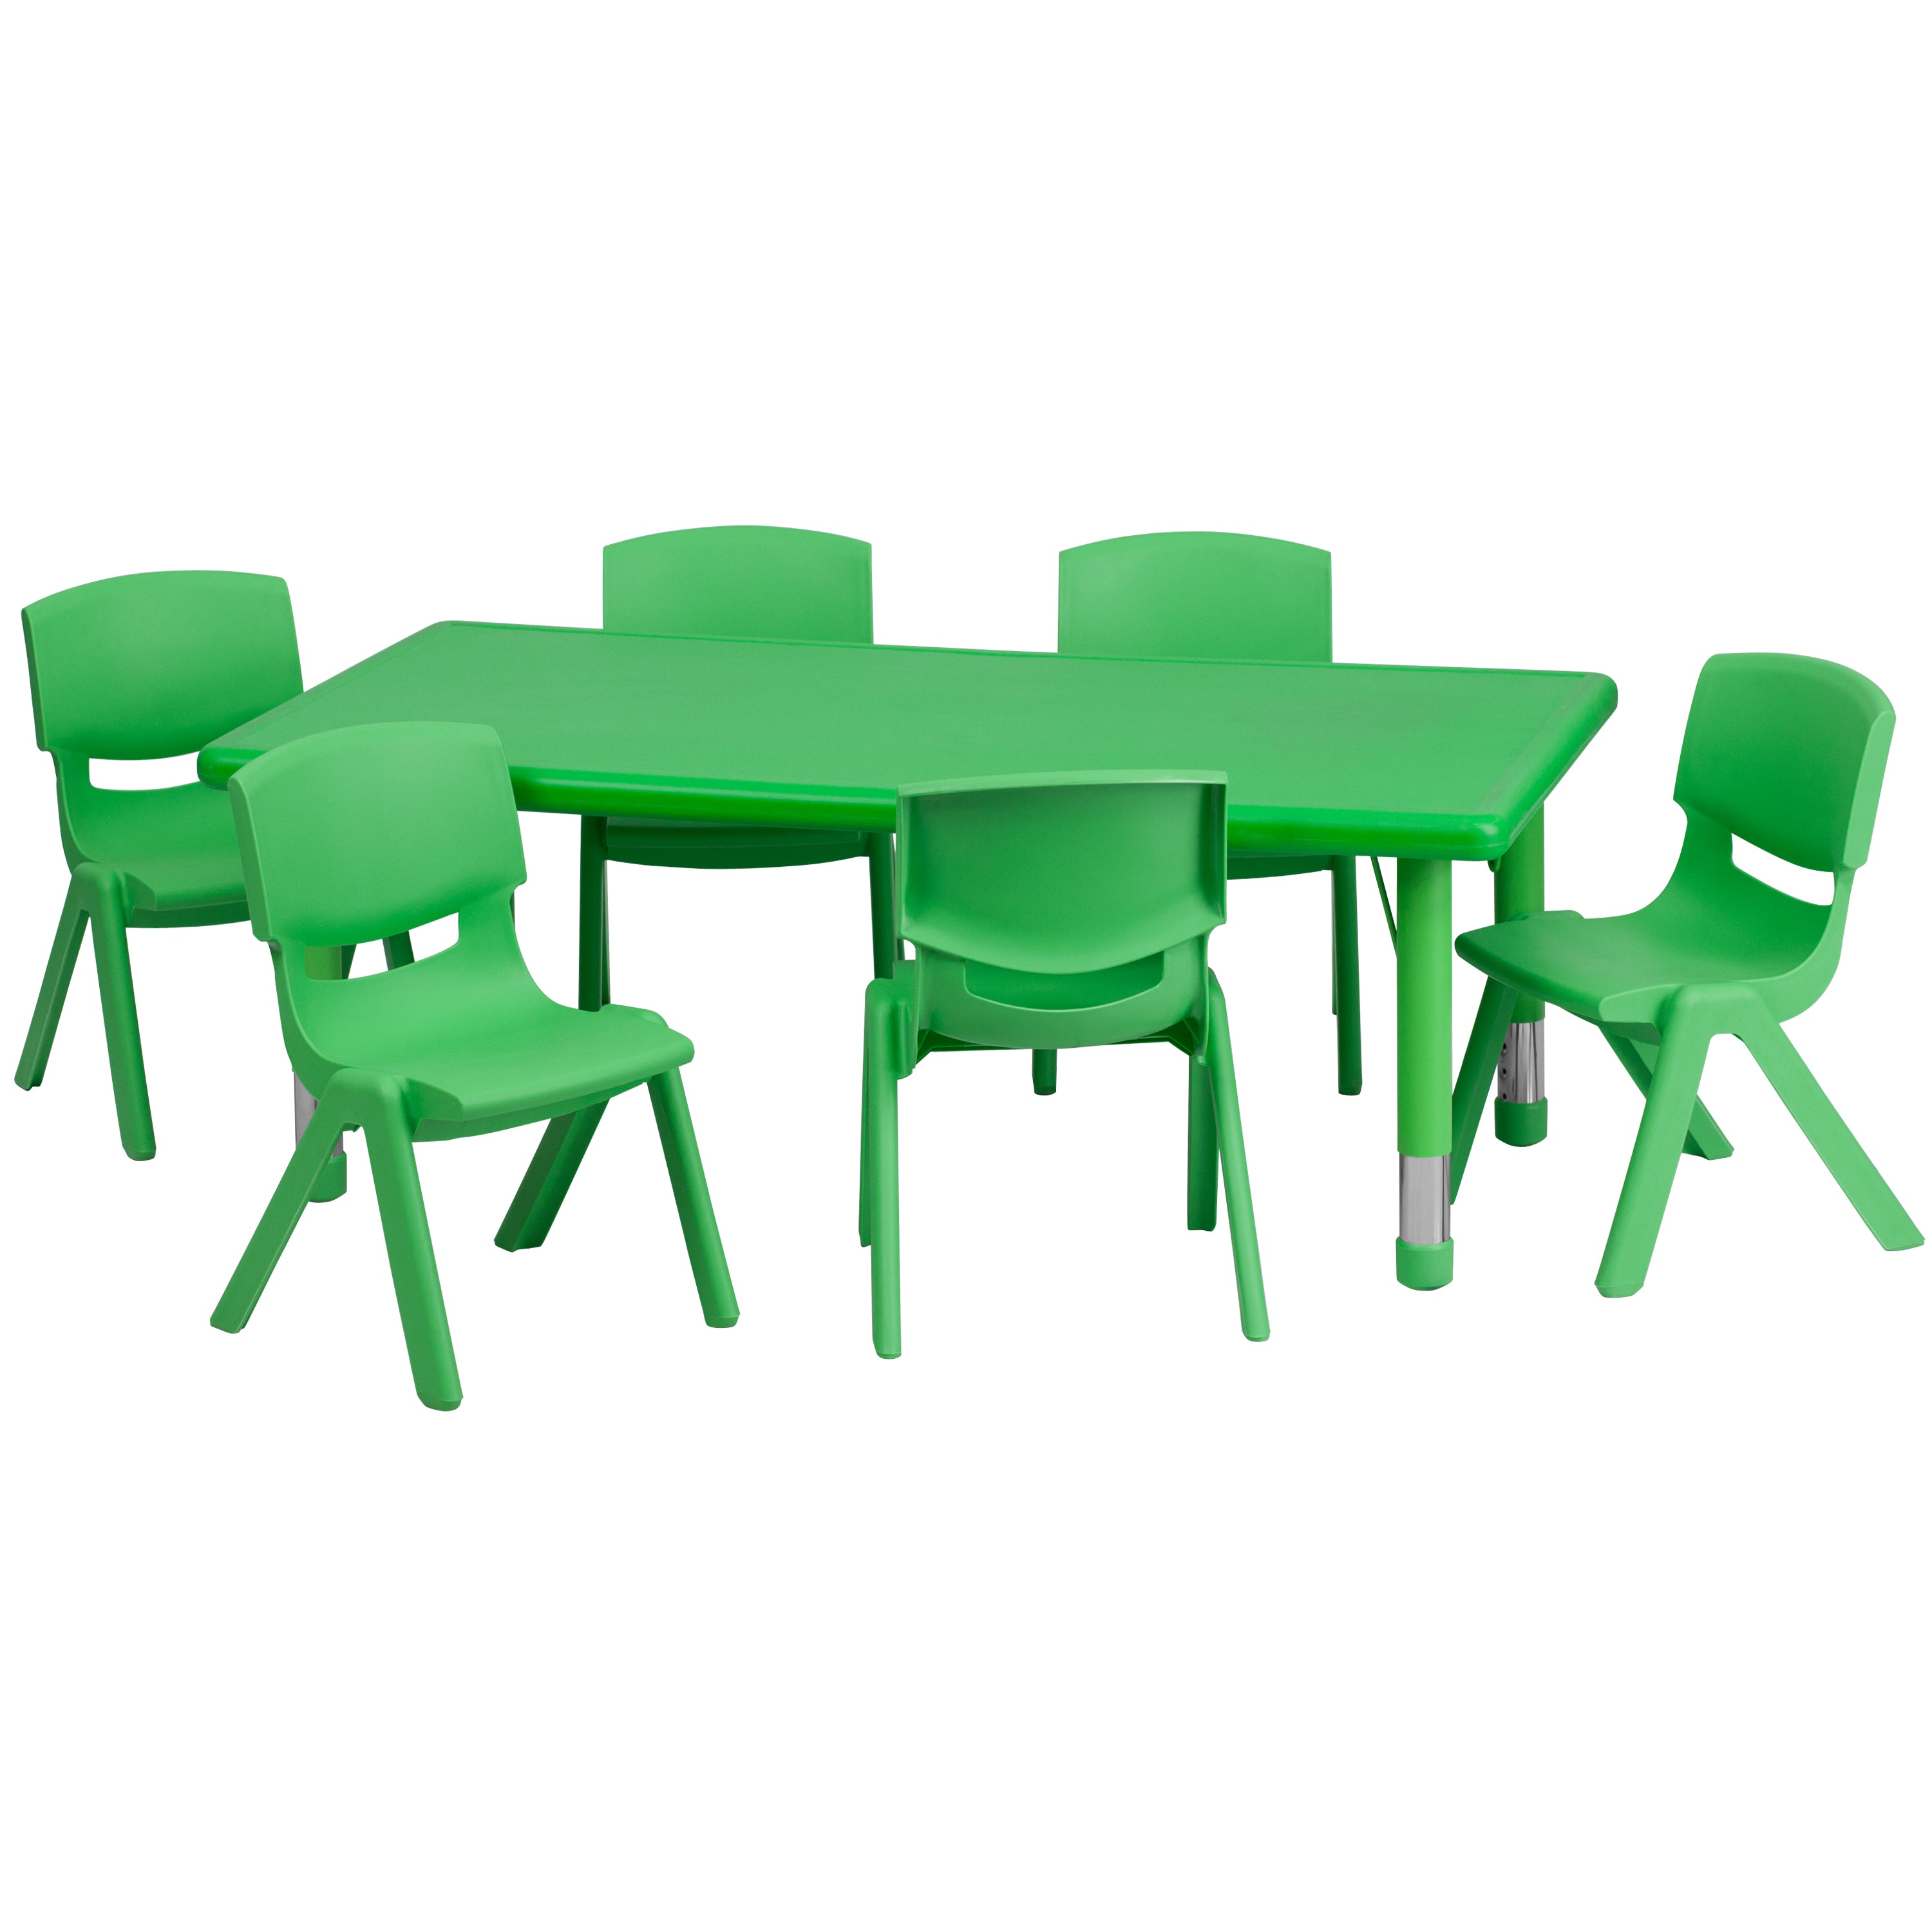 24"W x 48"L Rectangular Plastic Height Adjustable Activity Table Set with 6 Chairs-Rectangular Activity Table Set-Flash Furniture-Wall2Wall Furnishings